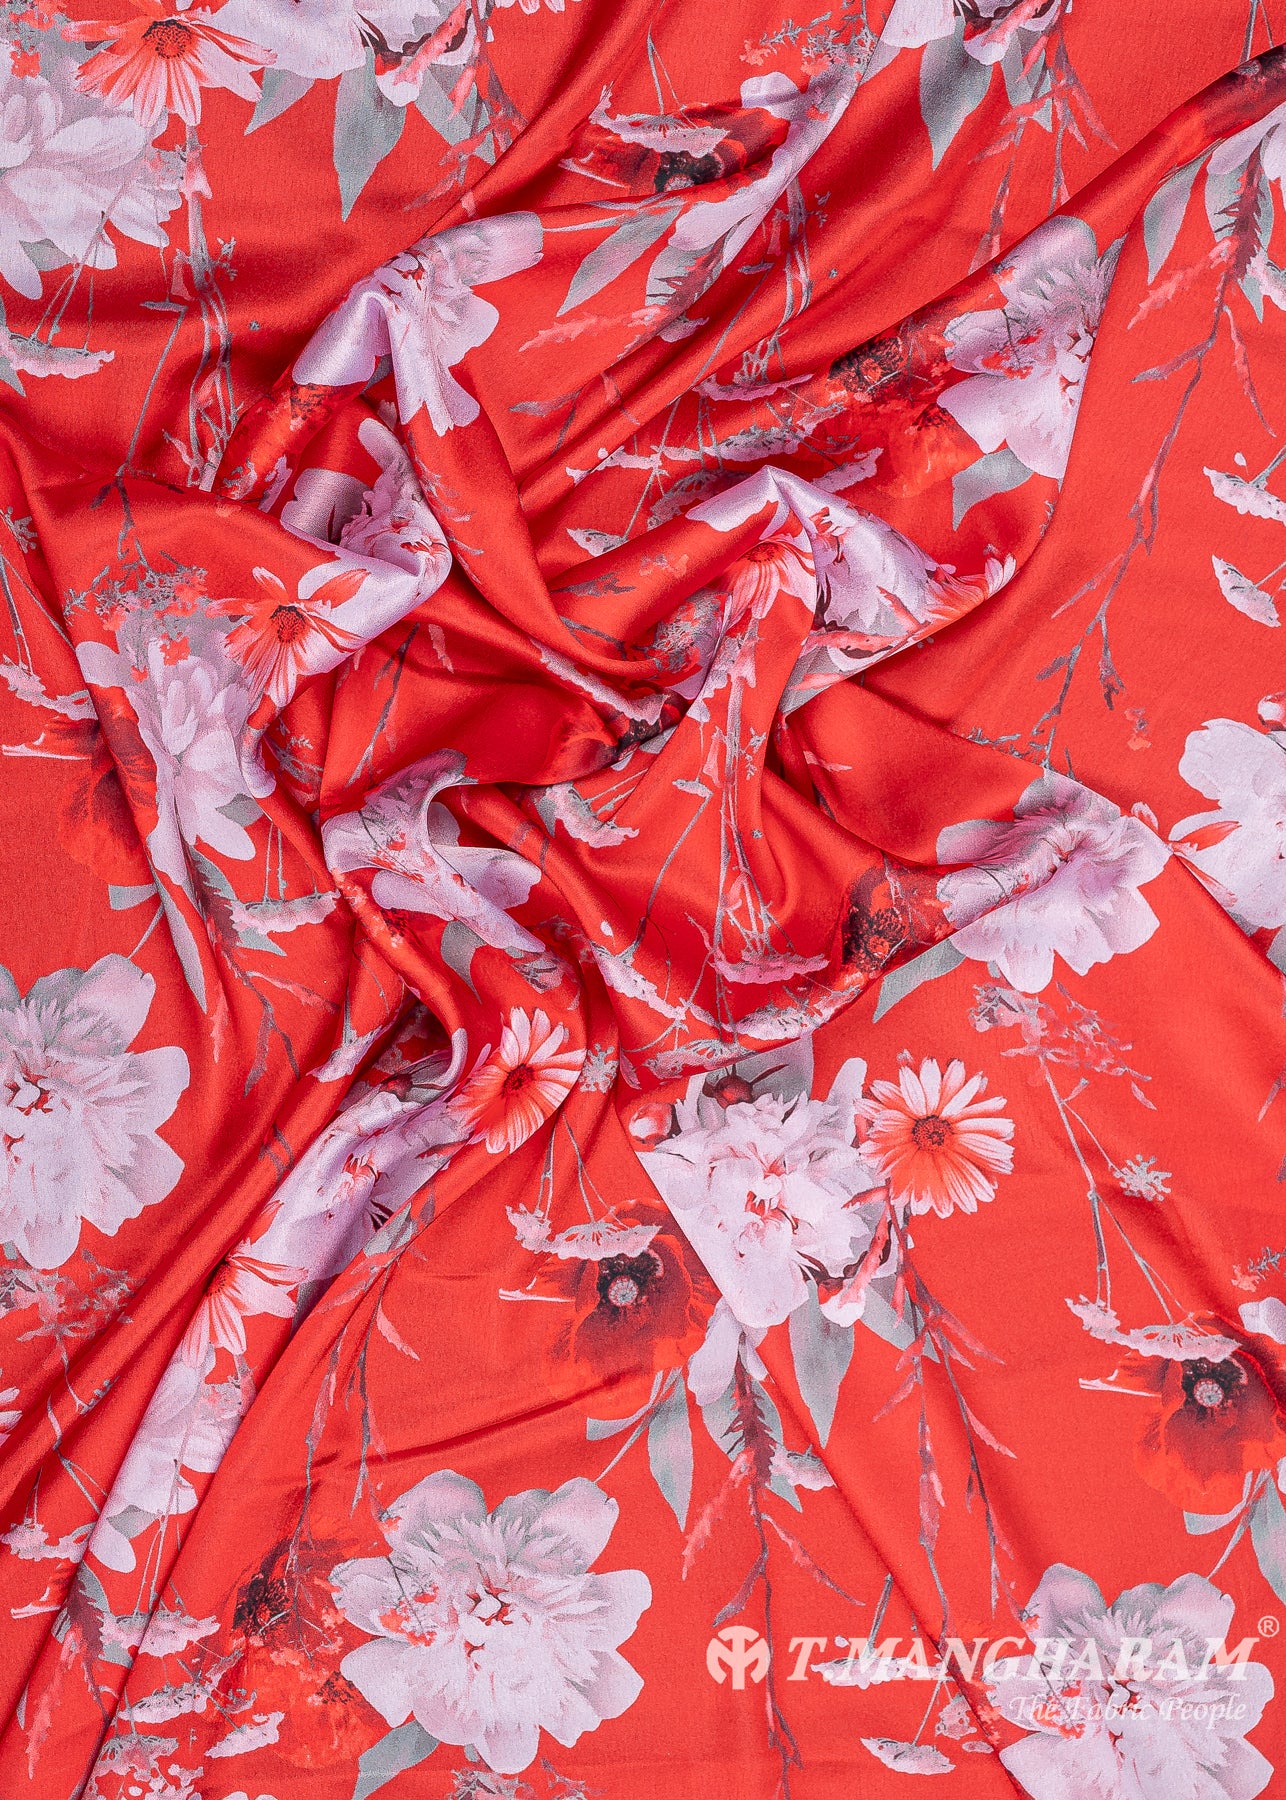 Red Satin Fabric - EC8778 view-4